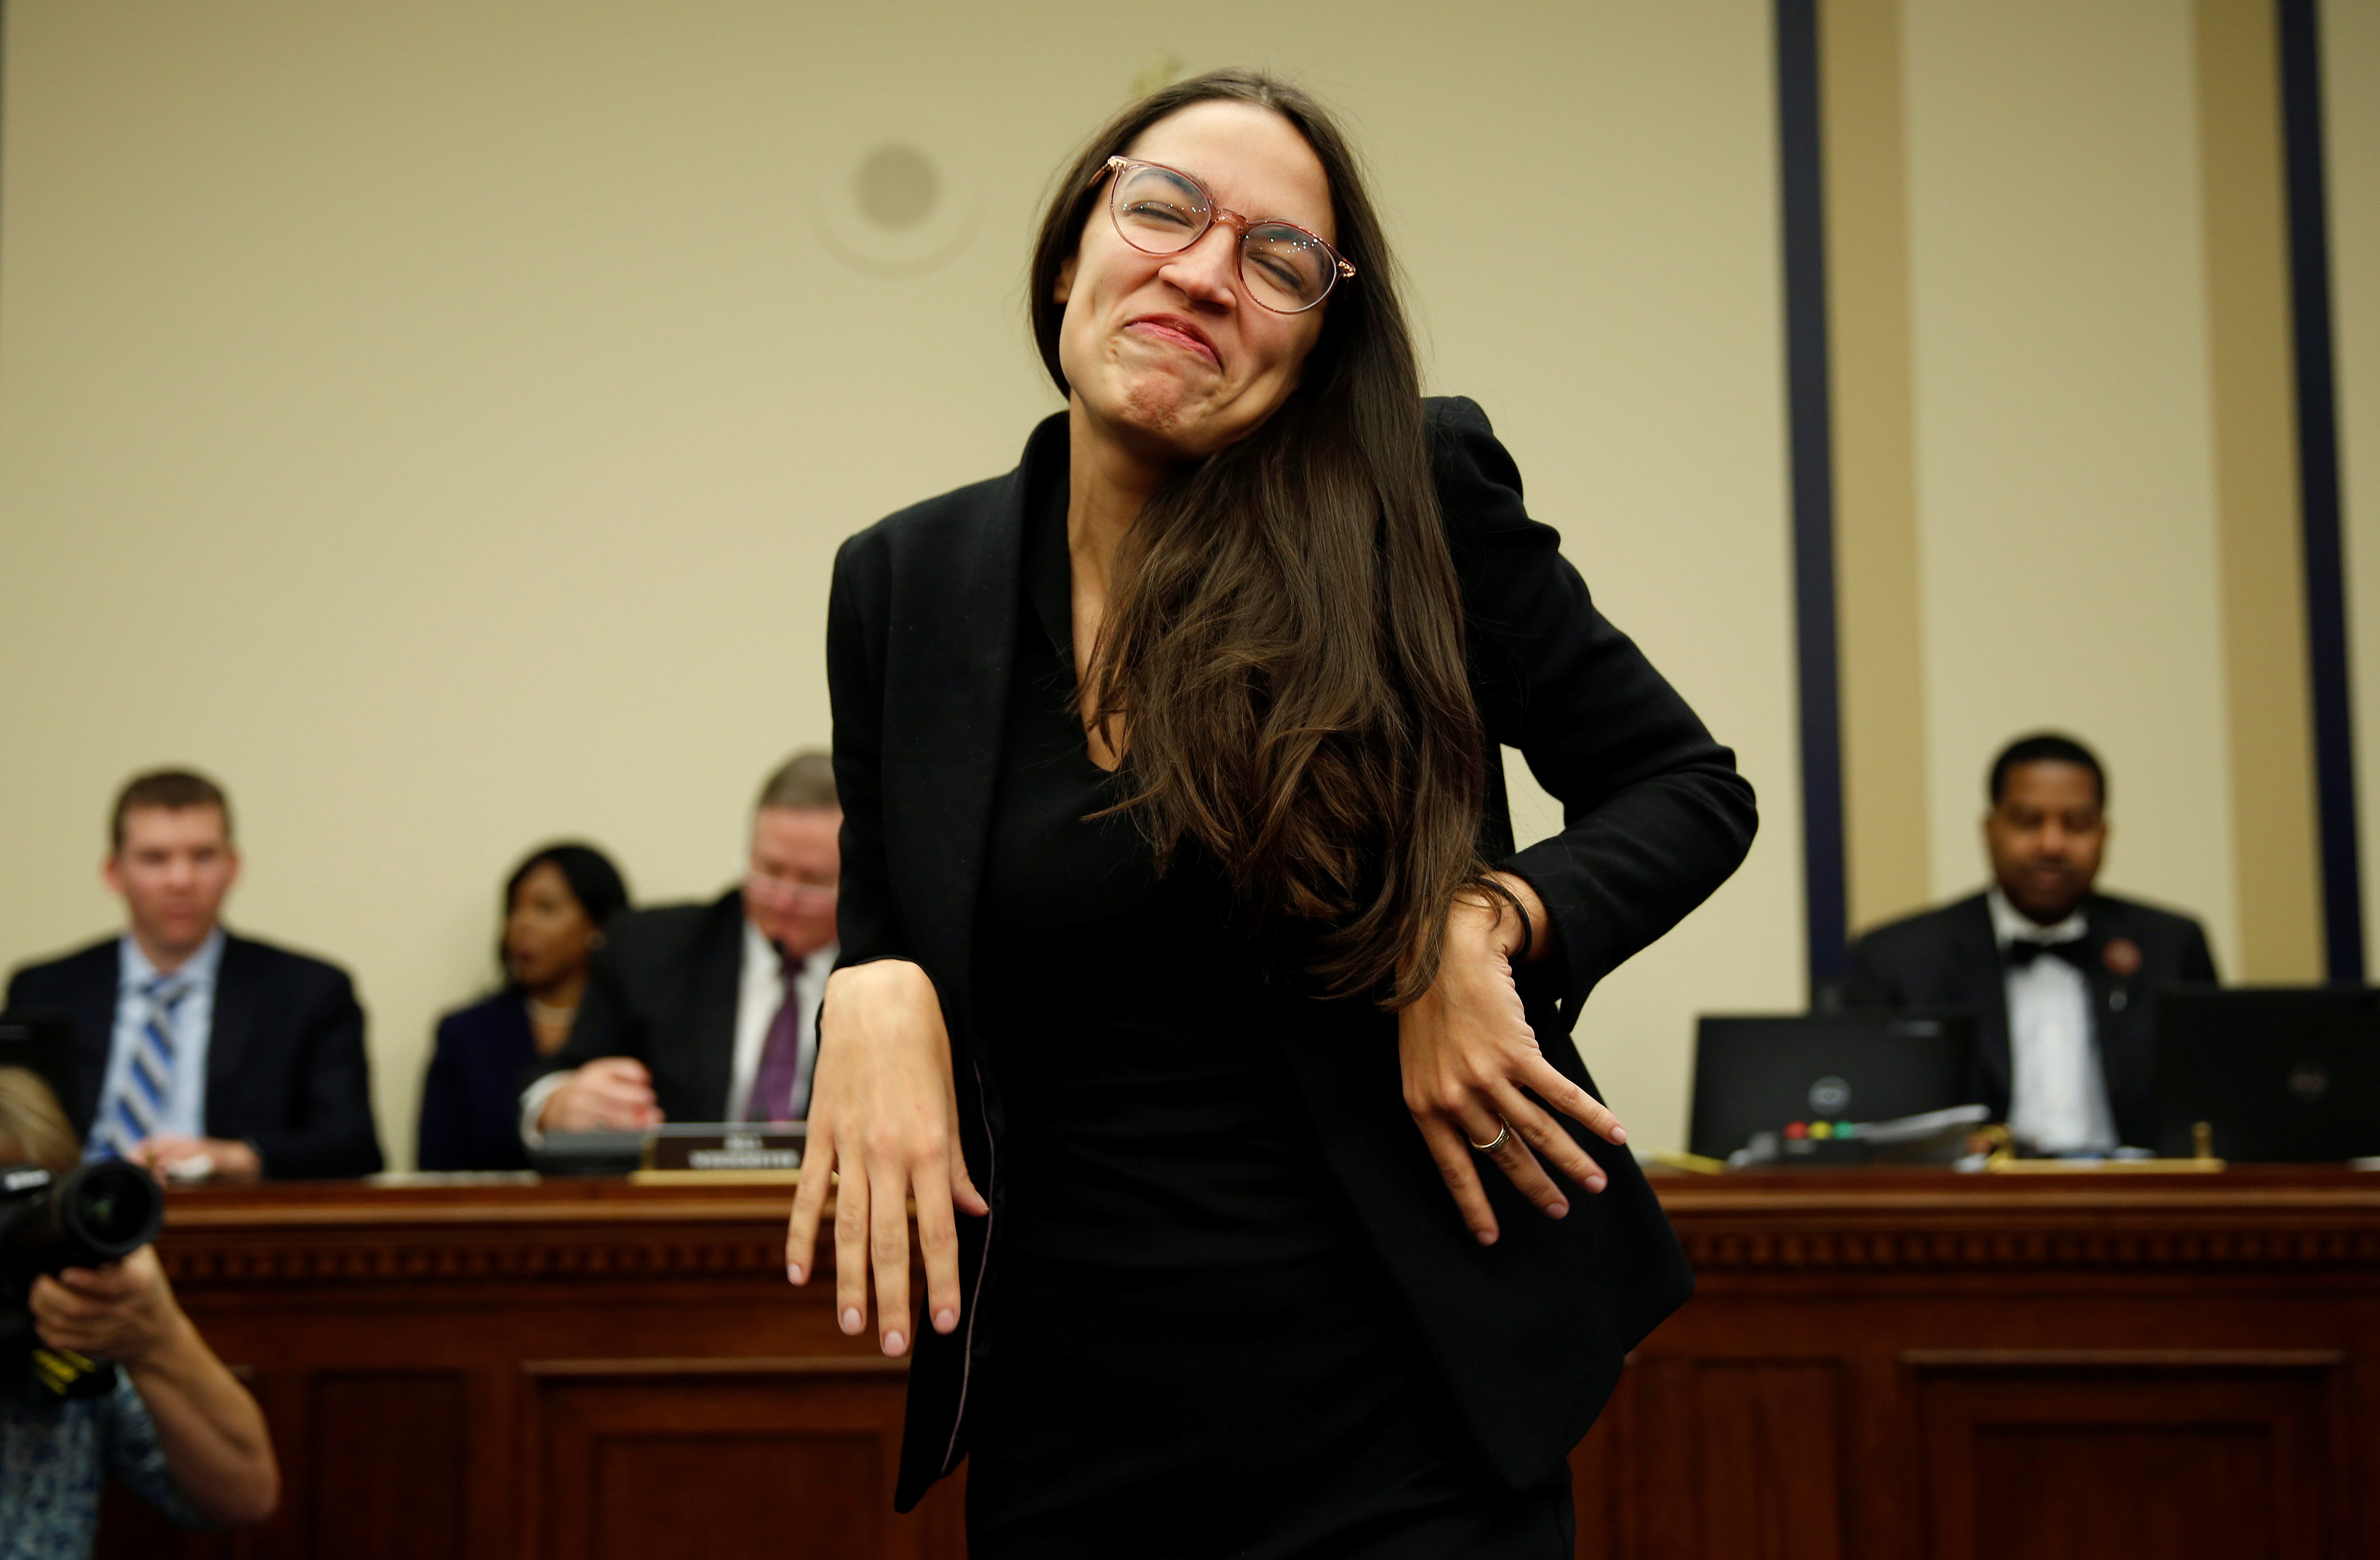 Representative-elect Alexandria Ocasio Cortez (D-NY) reacts to drawing number 40 during a lottery for office assignments on Capitol Hill in Washington